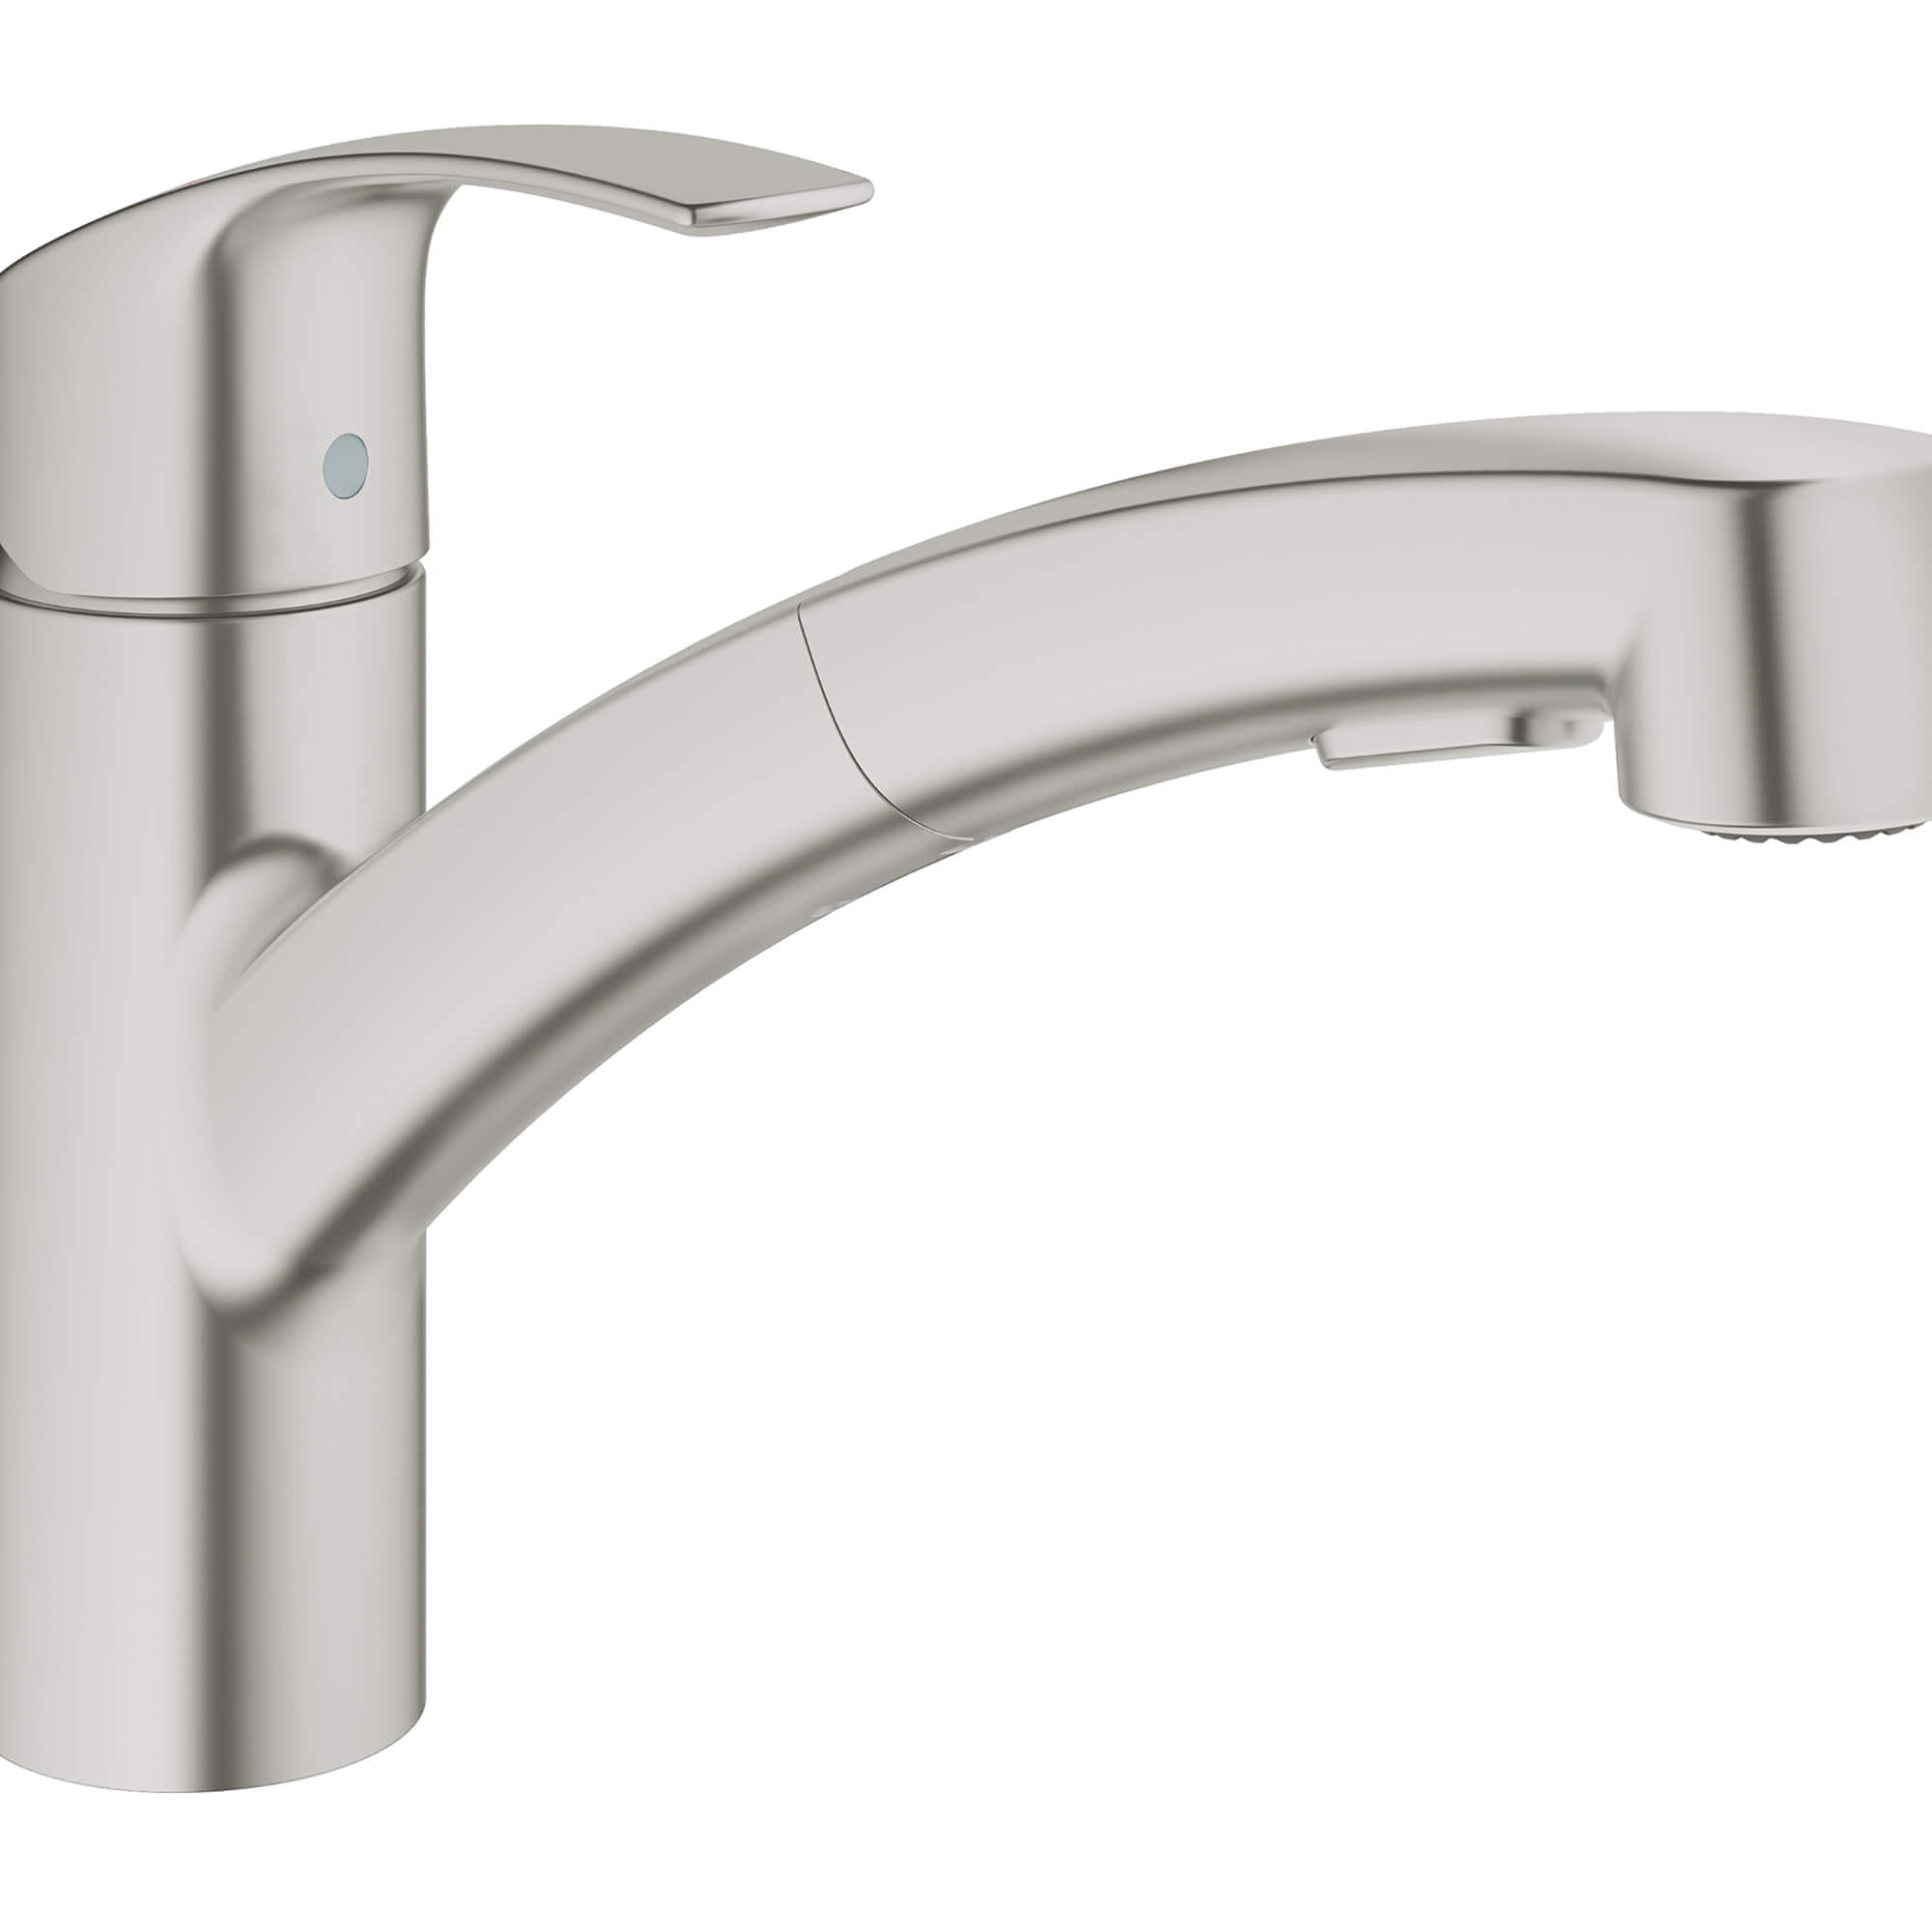 Eurosmart Single Handle Dual Spray Pull Out Kitchen Faucet GROHE SUPERSTEEL